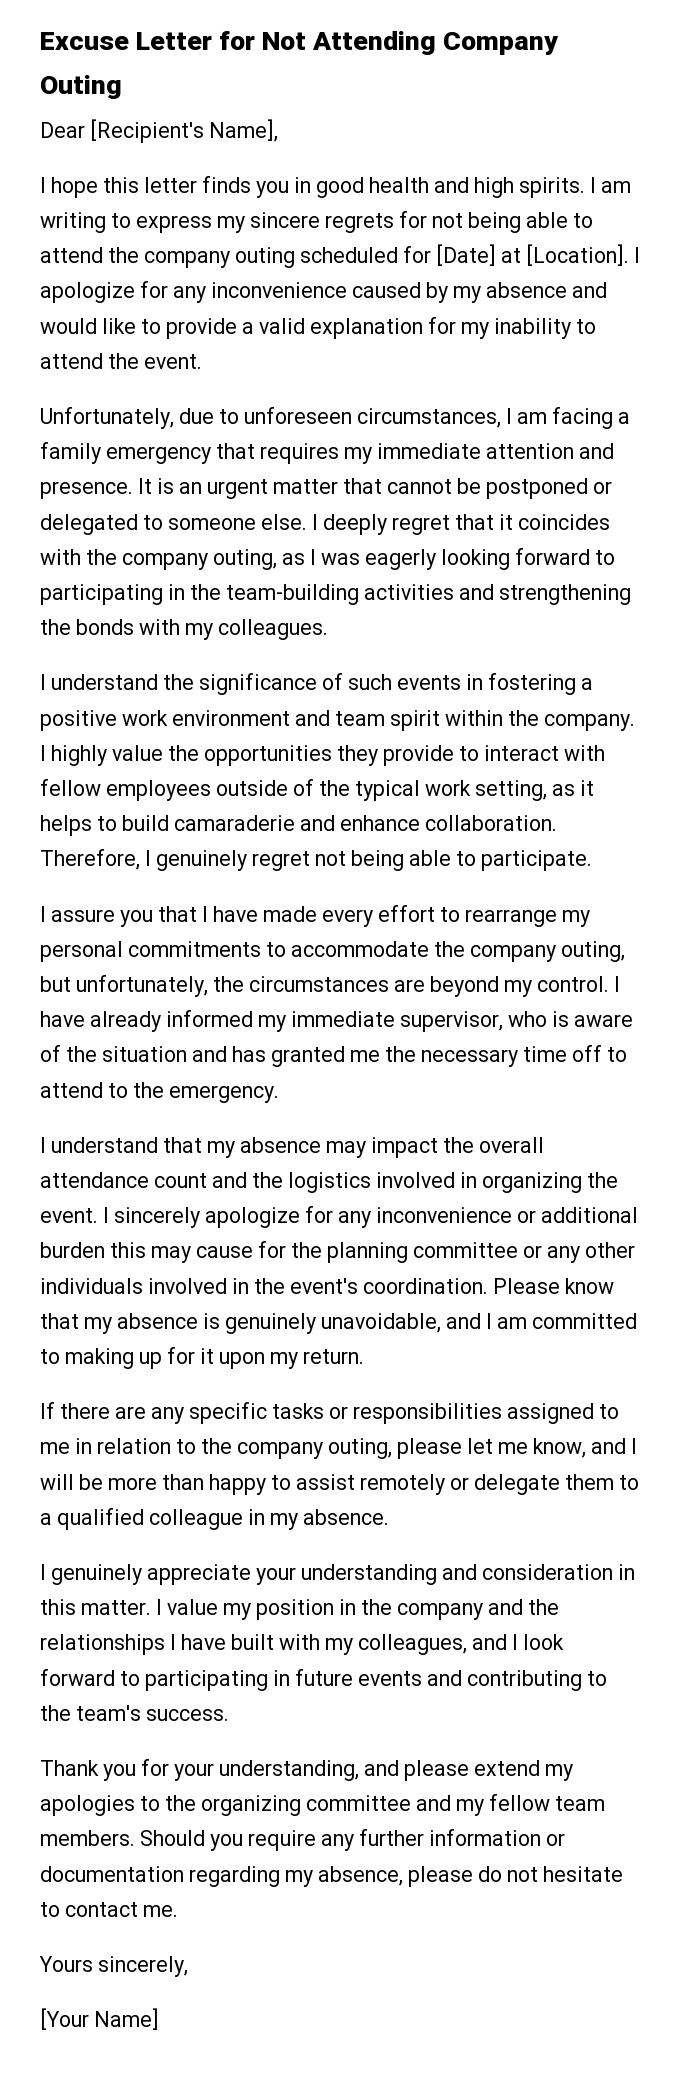 Excuse Letter for Not Attending Company Outing